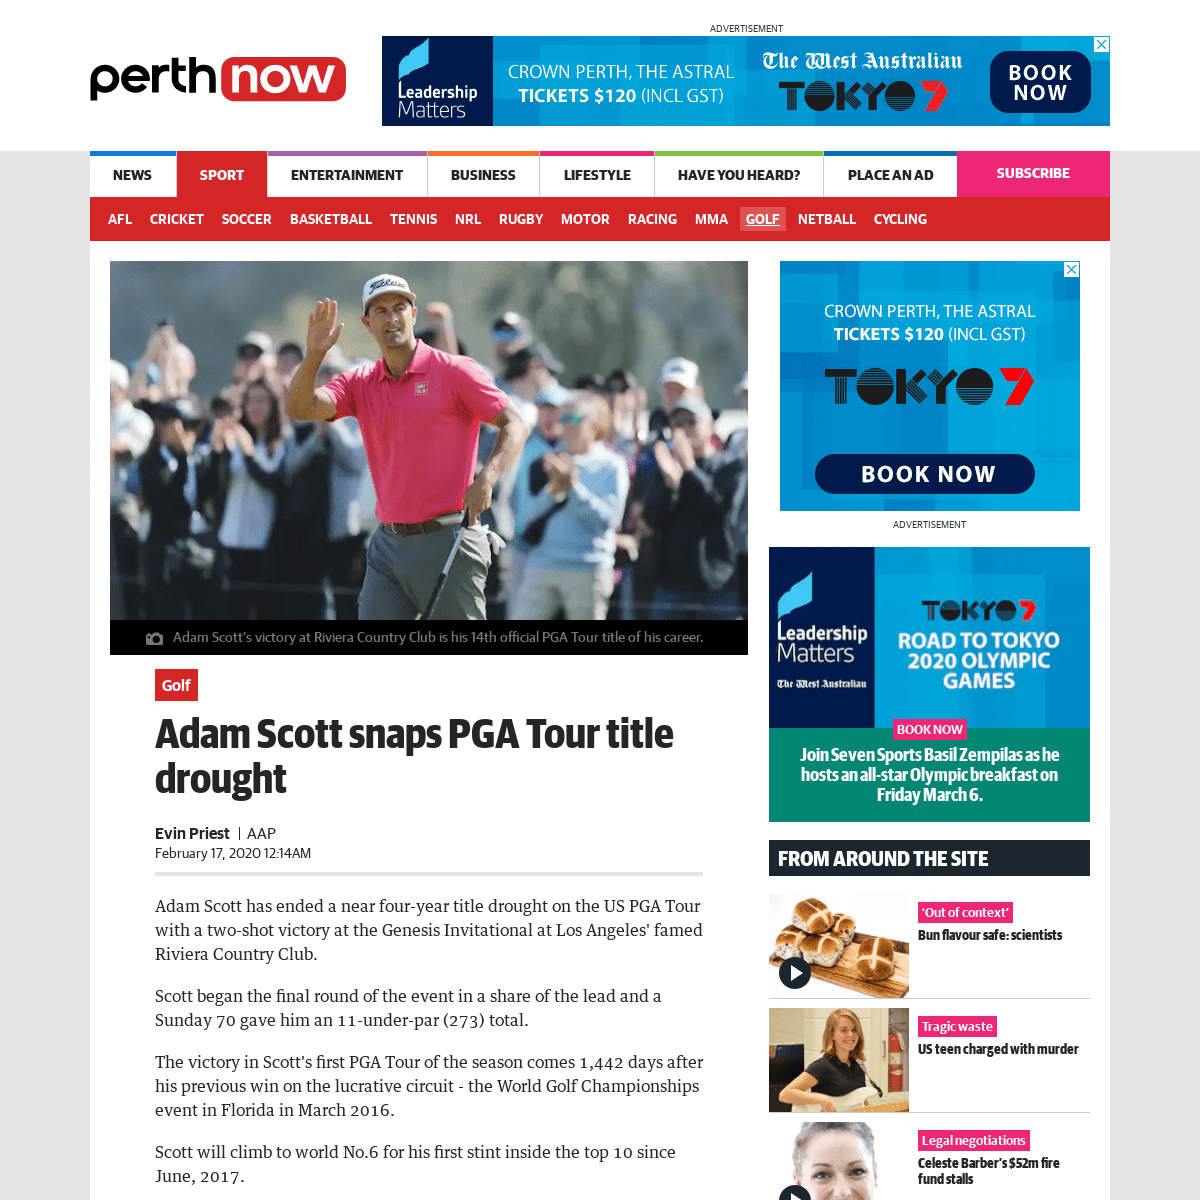 A complete backup of www.perthnow.com.au/sport/golf/adam-scott-takes-solo-pga-lead-at-riviera-ng-s-1995434